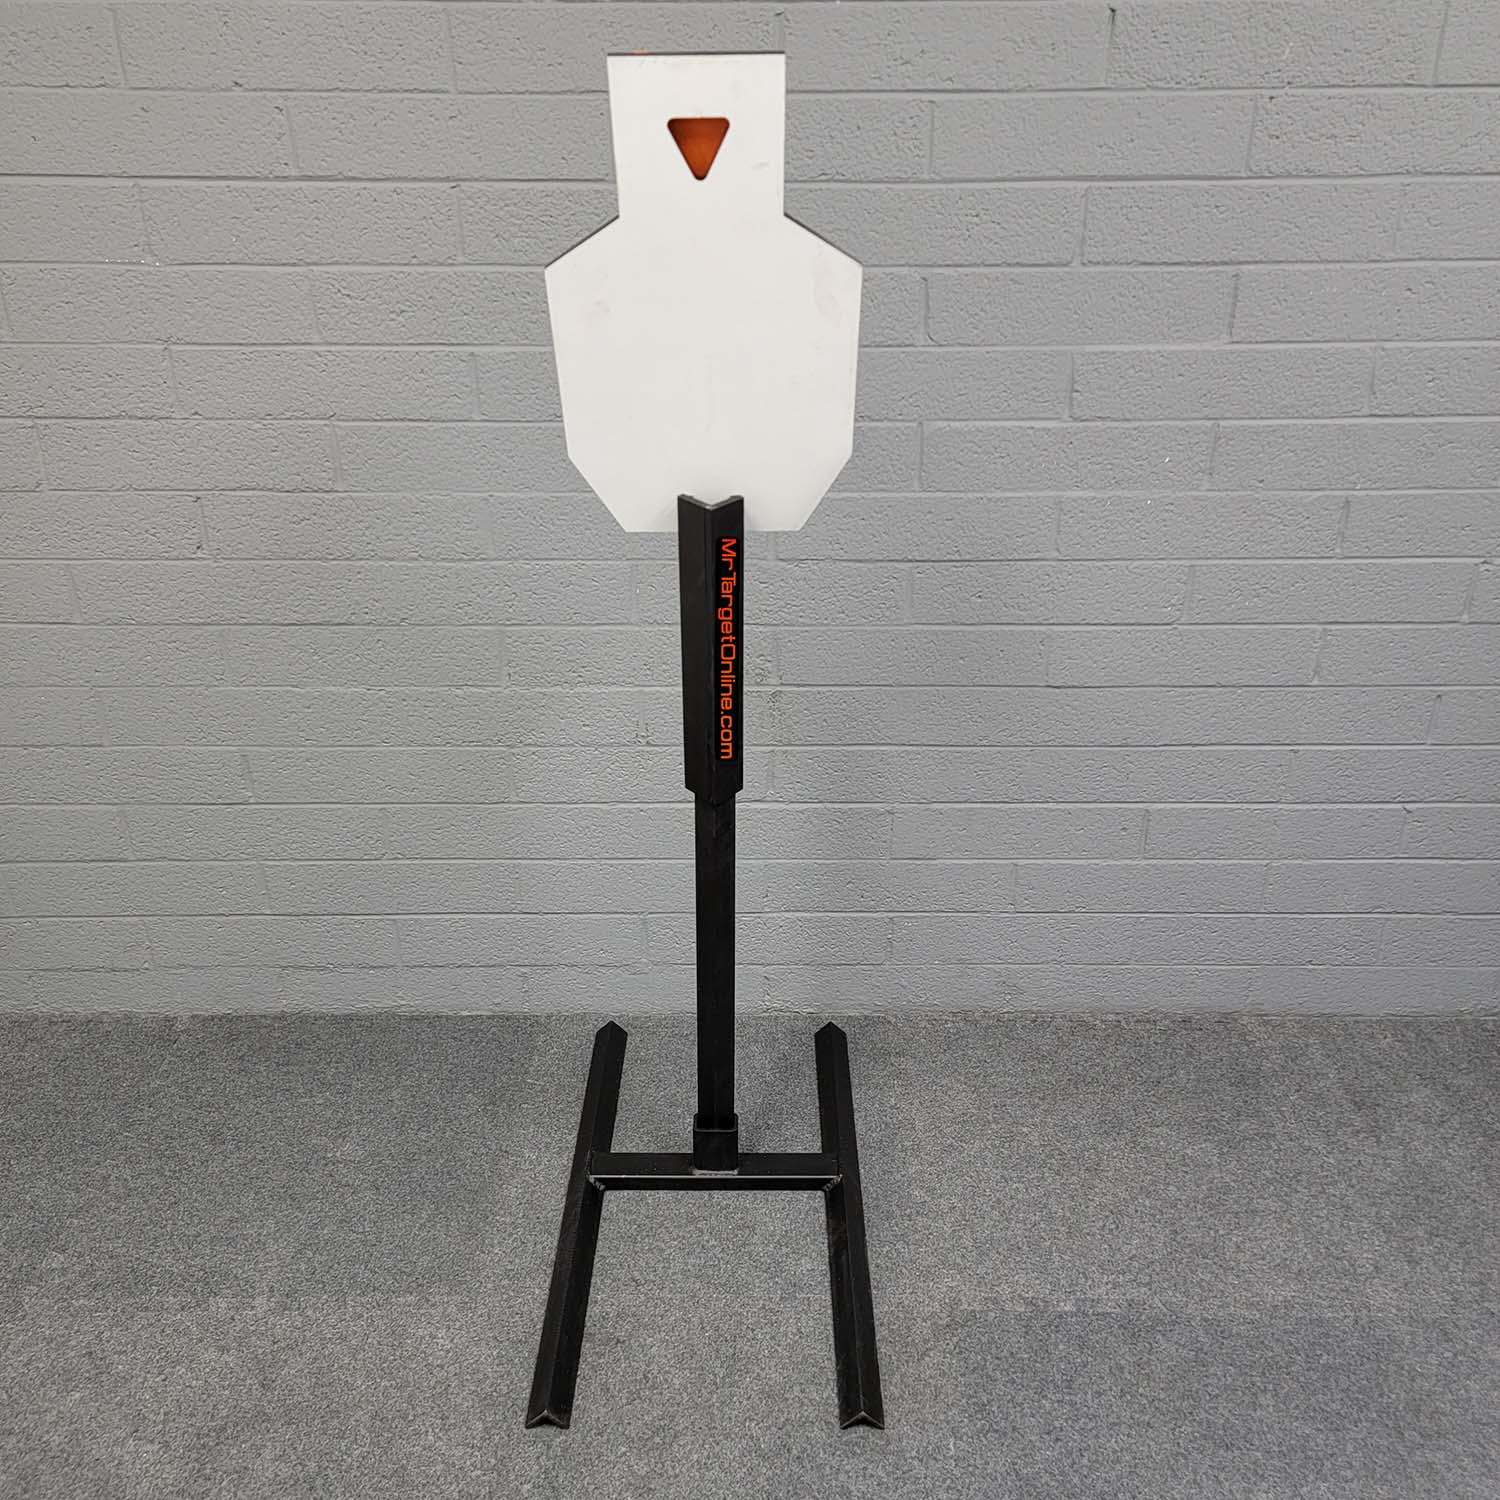 Know your limits Reactive Steel target for .22 precision shooting 